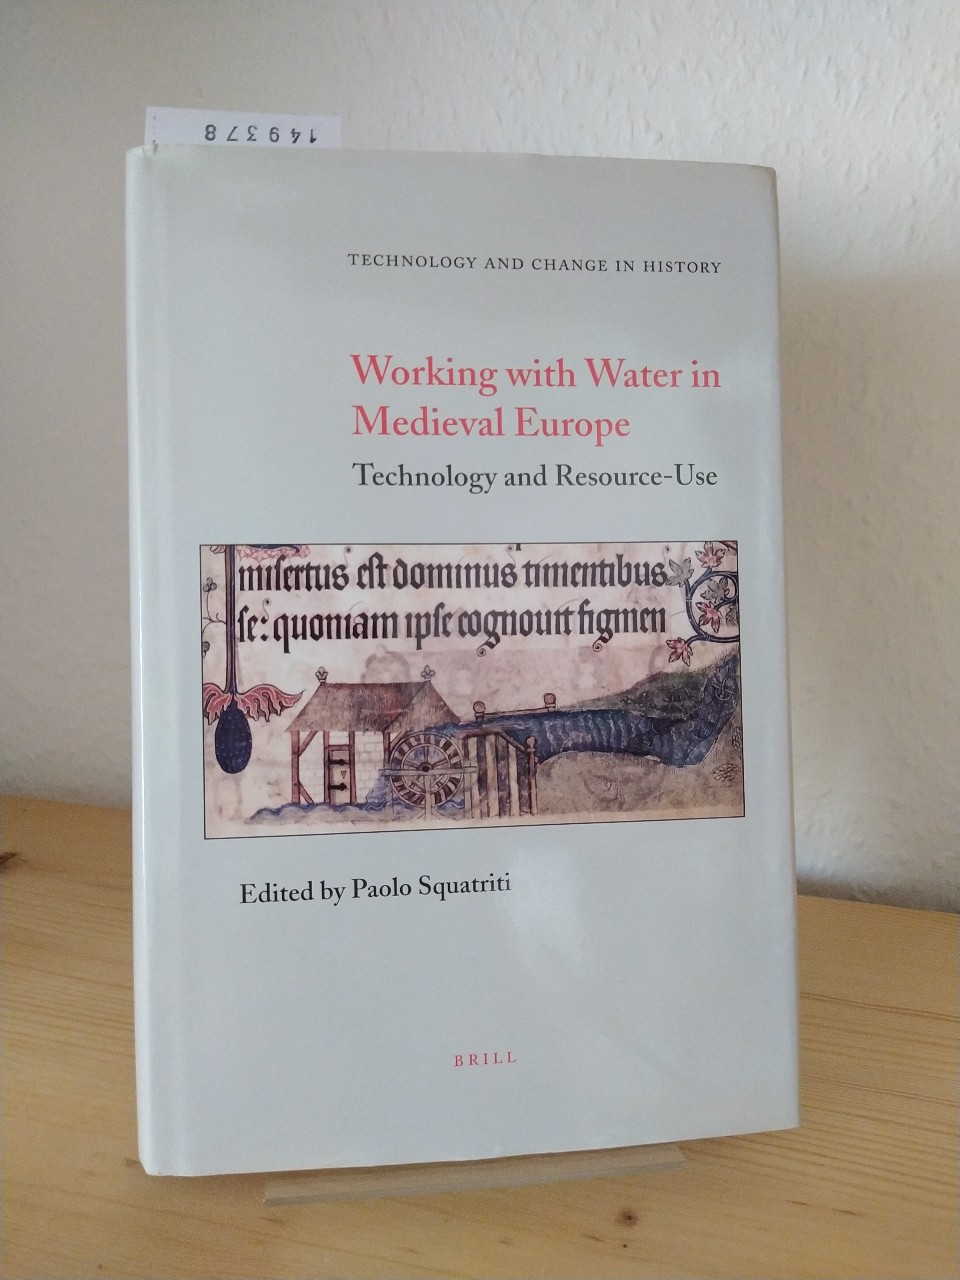 Working with water in medieval Europe. Technology and Resource-Use. [Edited by Paolo Squatriti]. (= Technology and change in history, Vol. 3). - Squatriti, Paolo (Ed.)